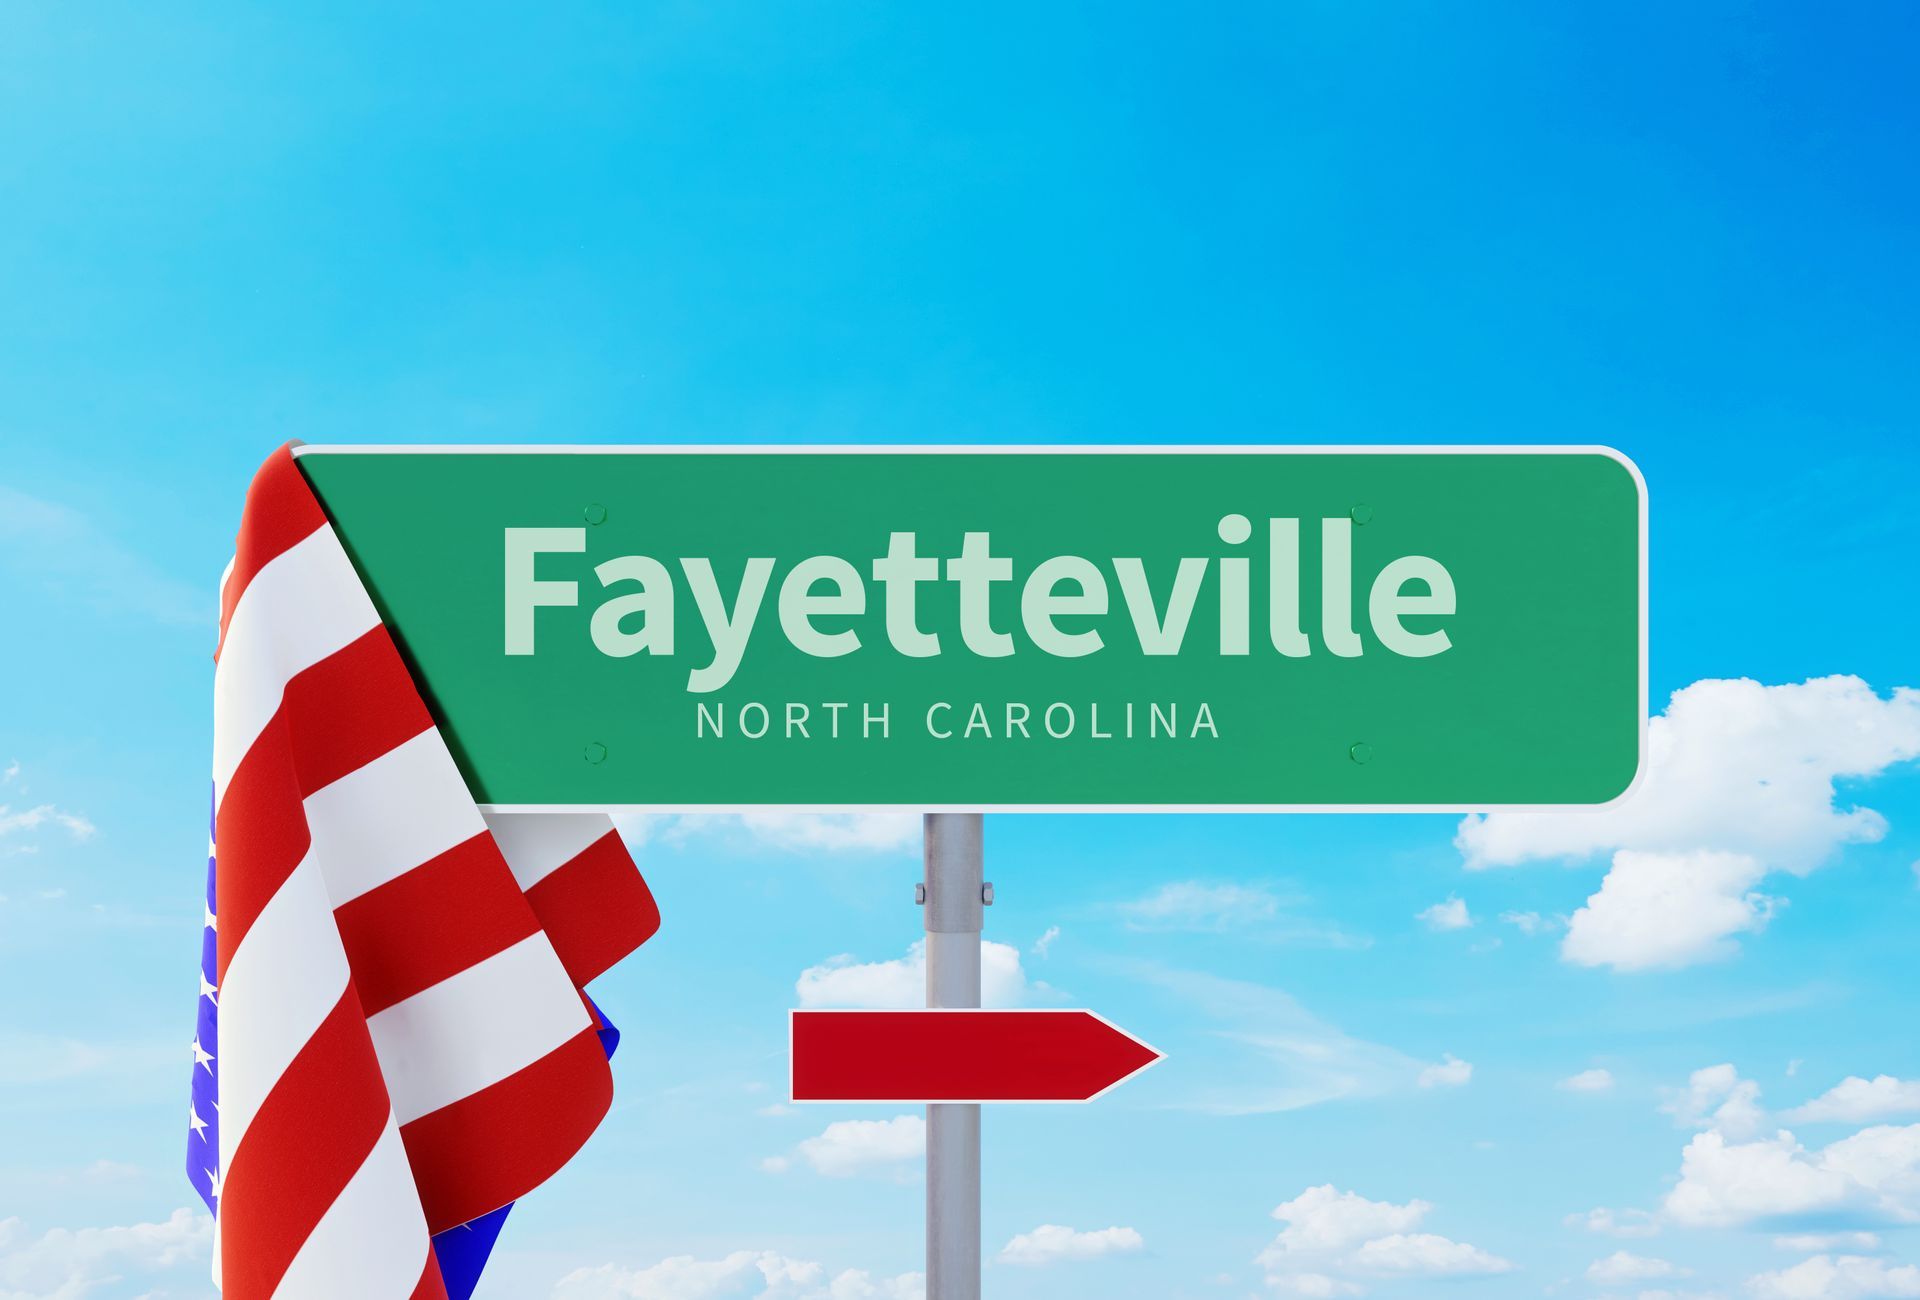 A green street sign for fayetteville north carolina